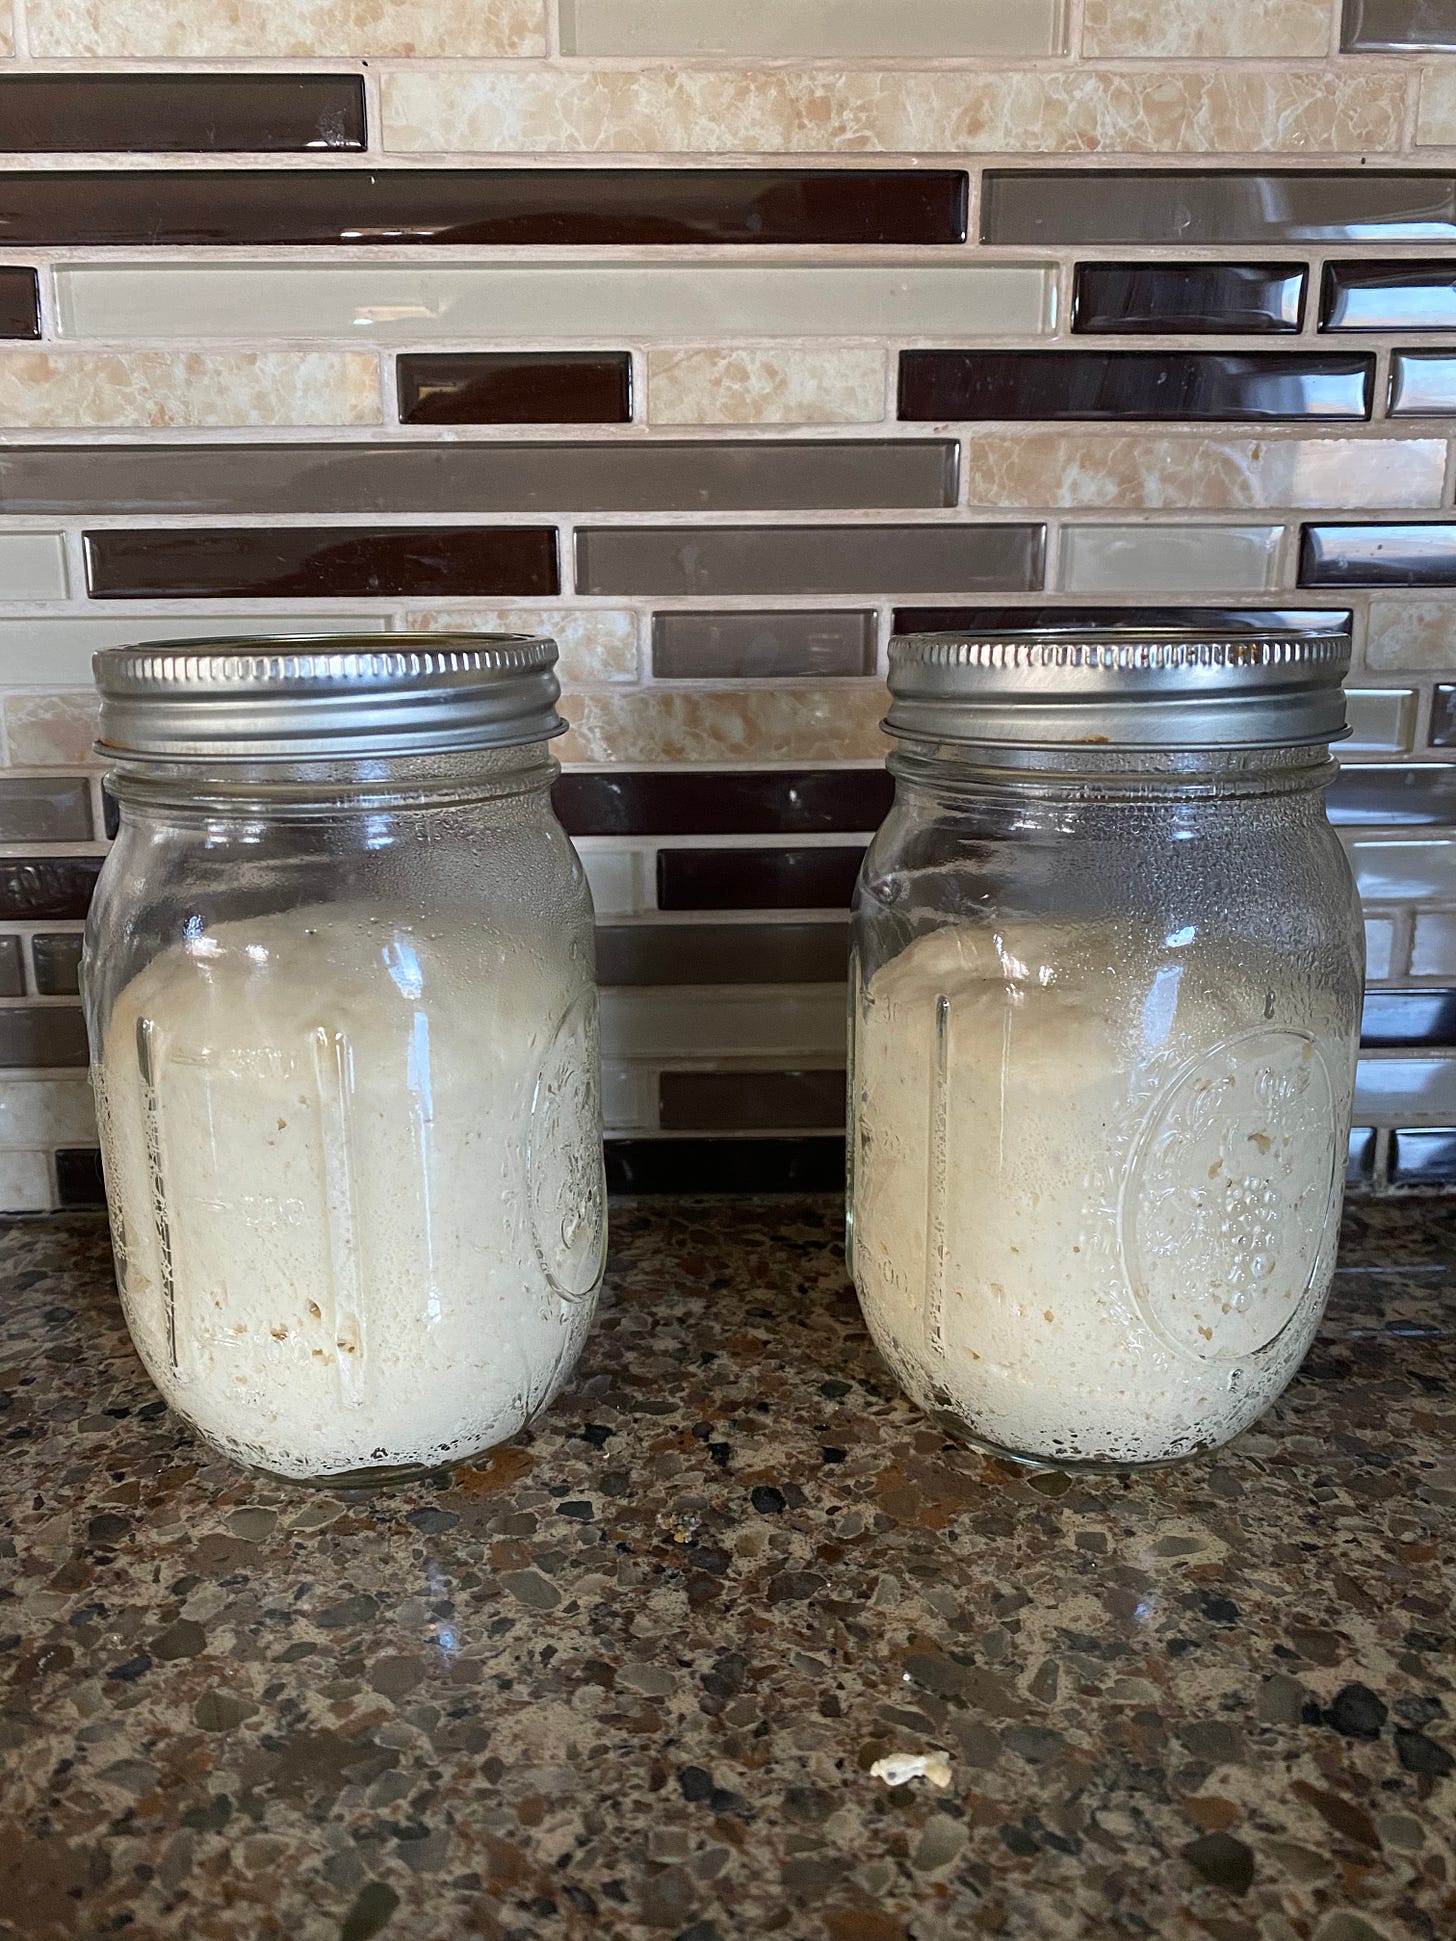 Dry sourdough starter from jovial foods